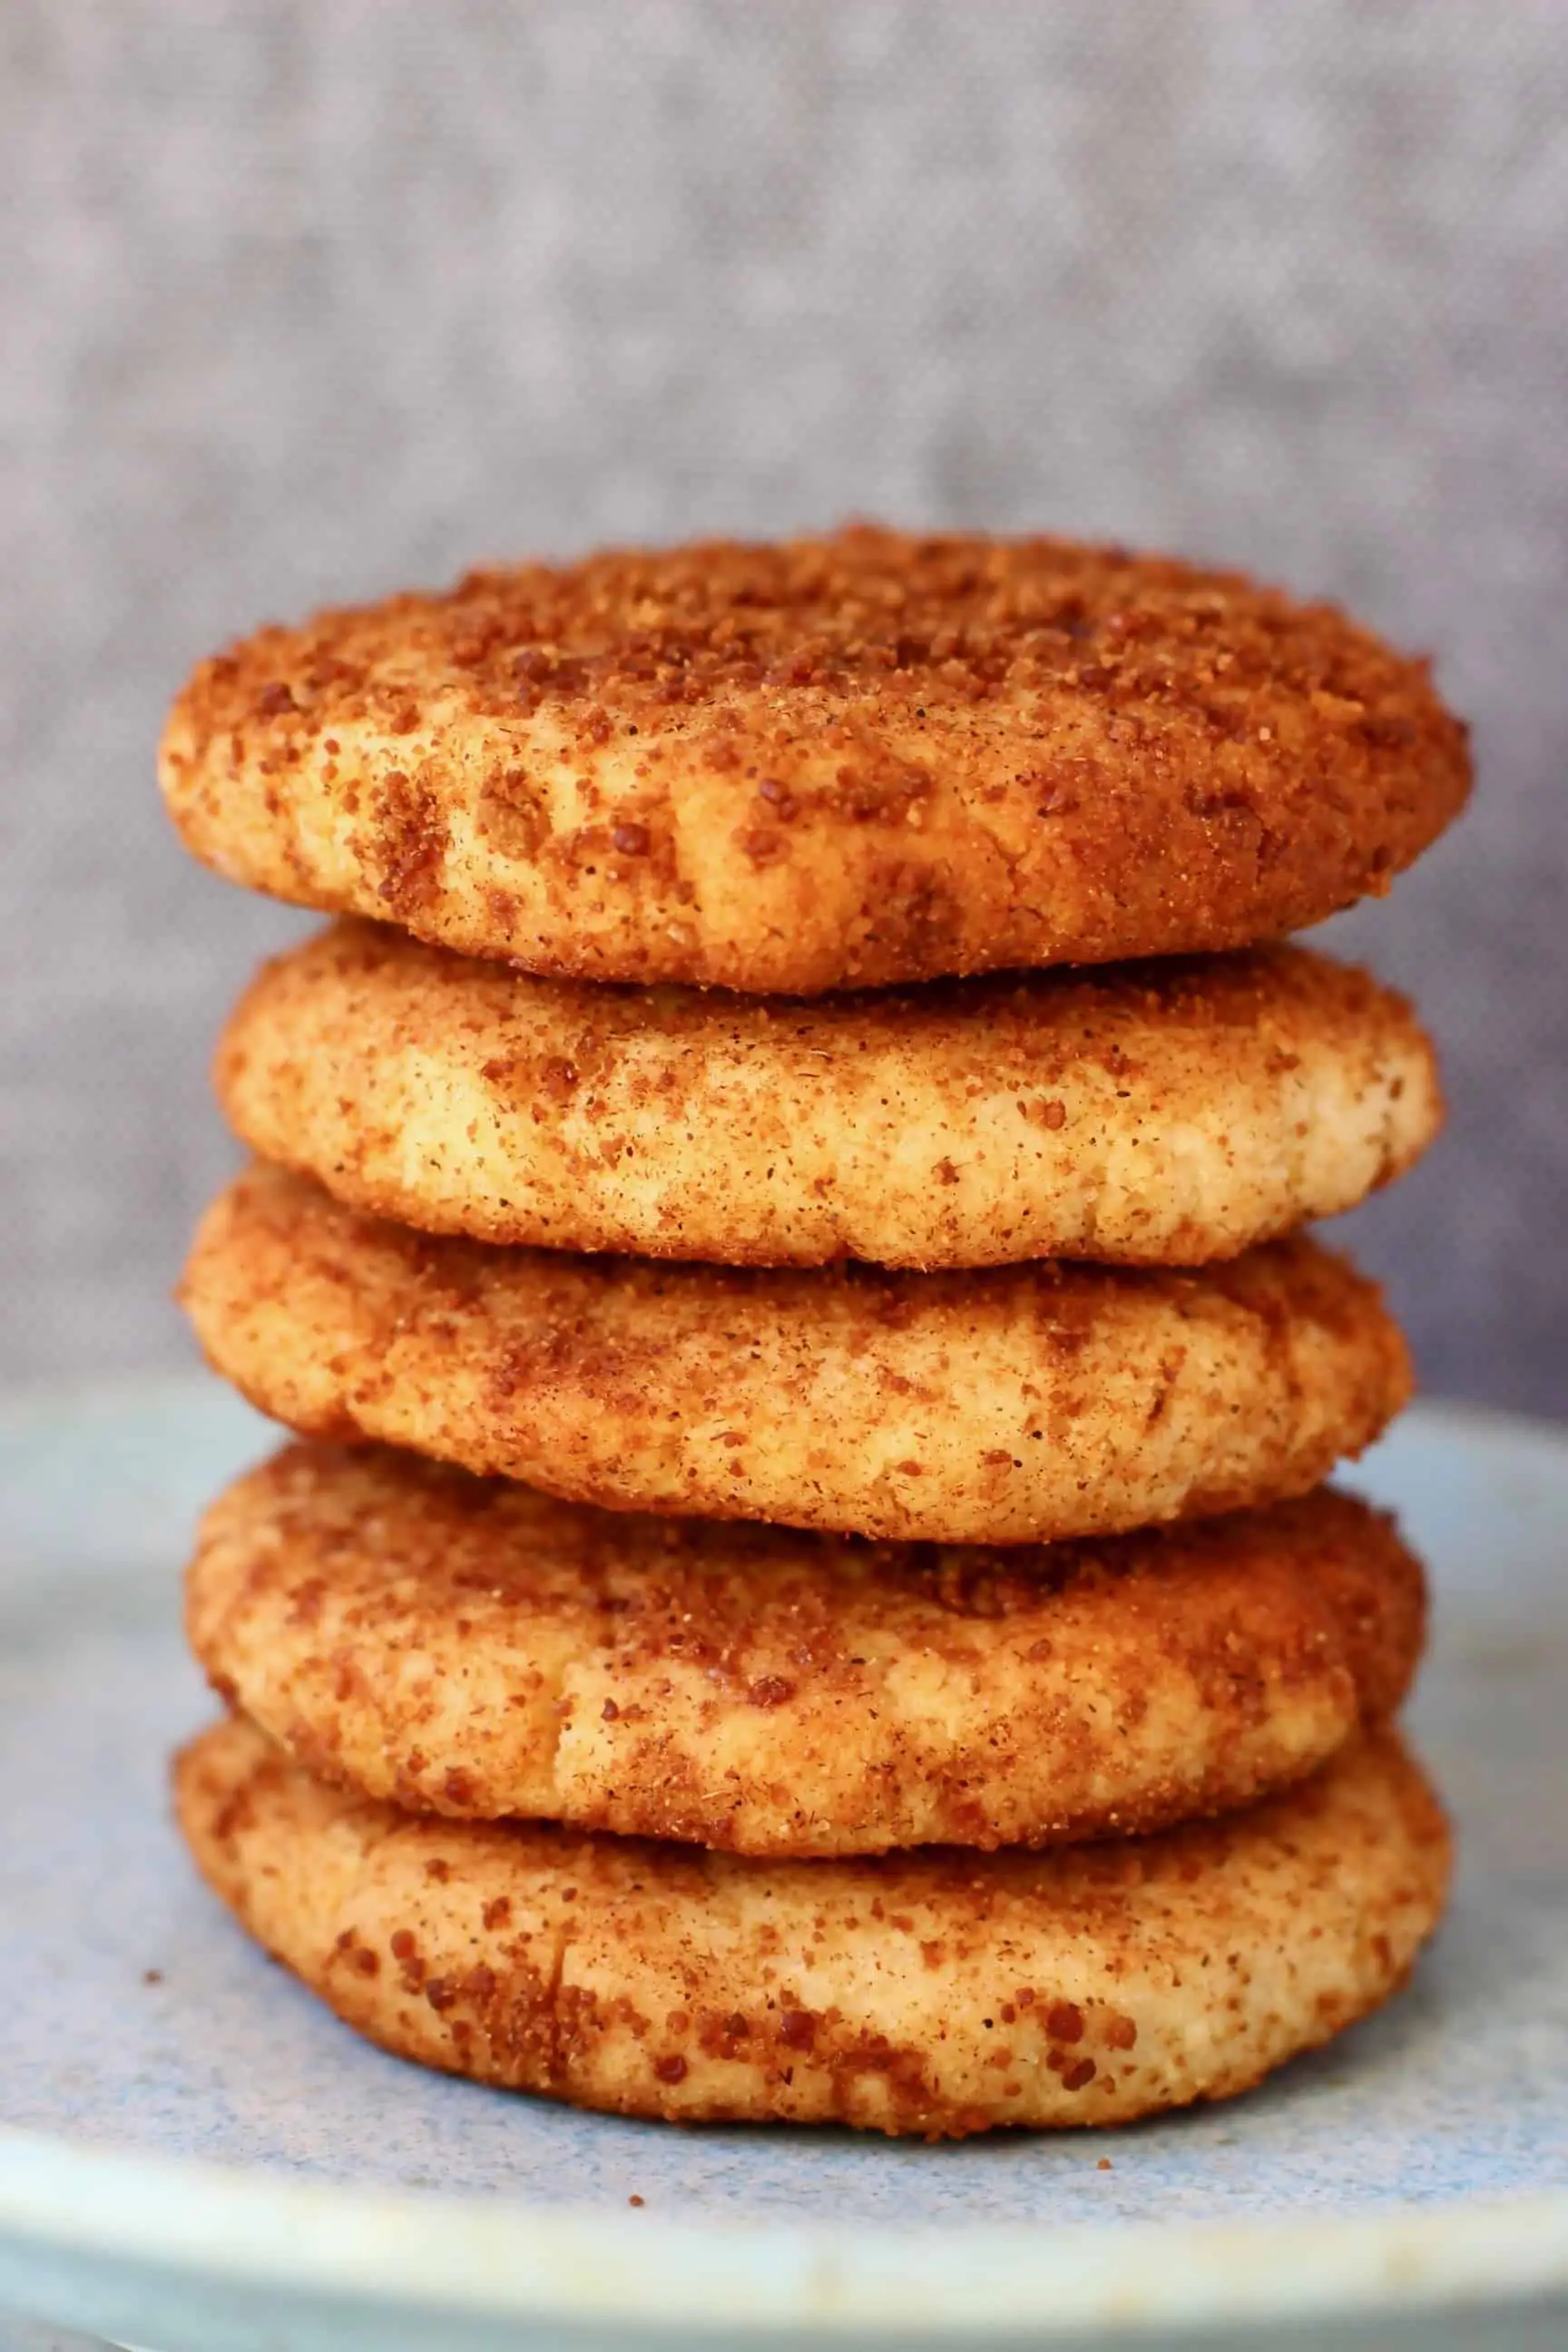 Five cookies coated in brown cinnamon sugar stacked on top of each other on a light blue plate against a grey background